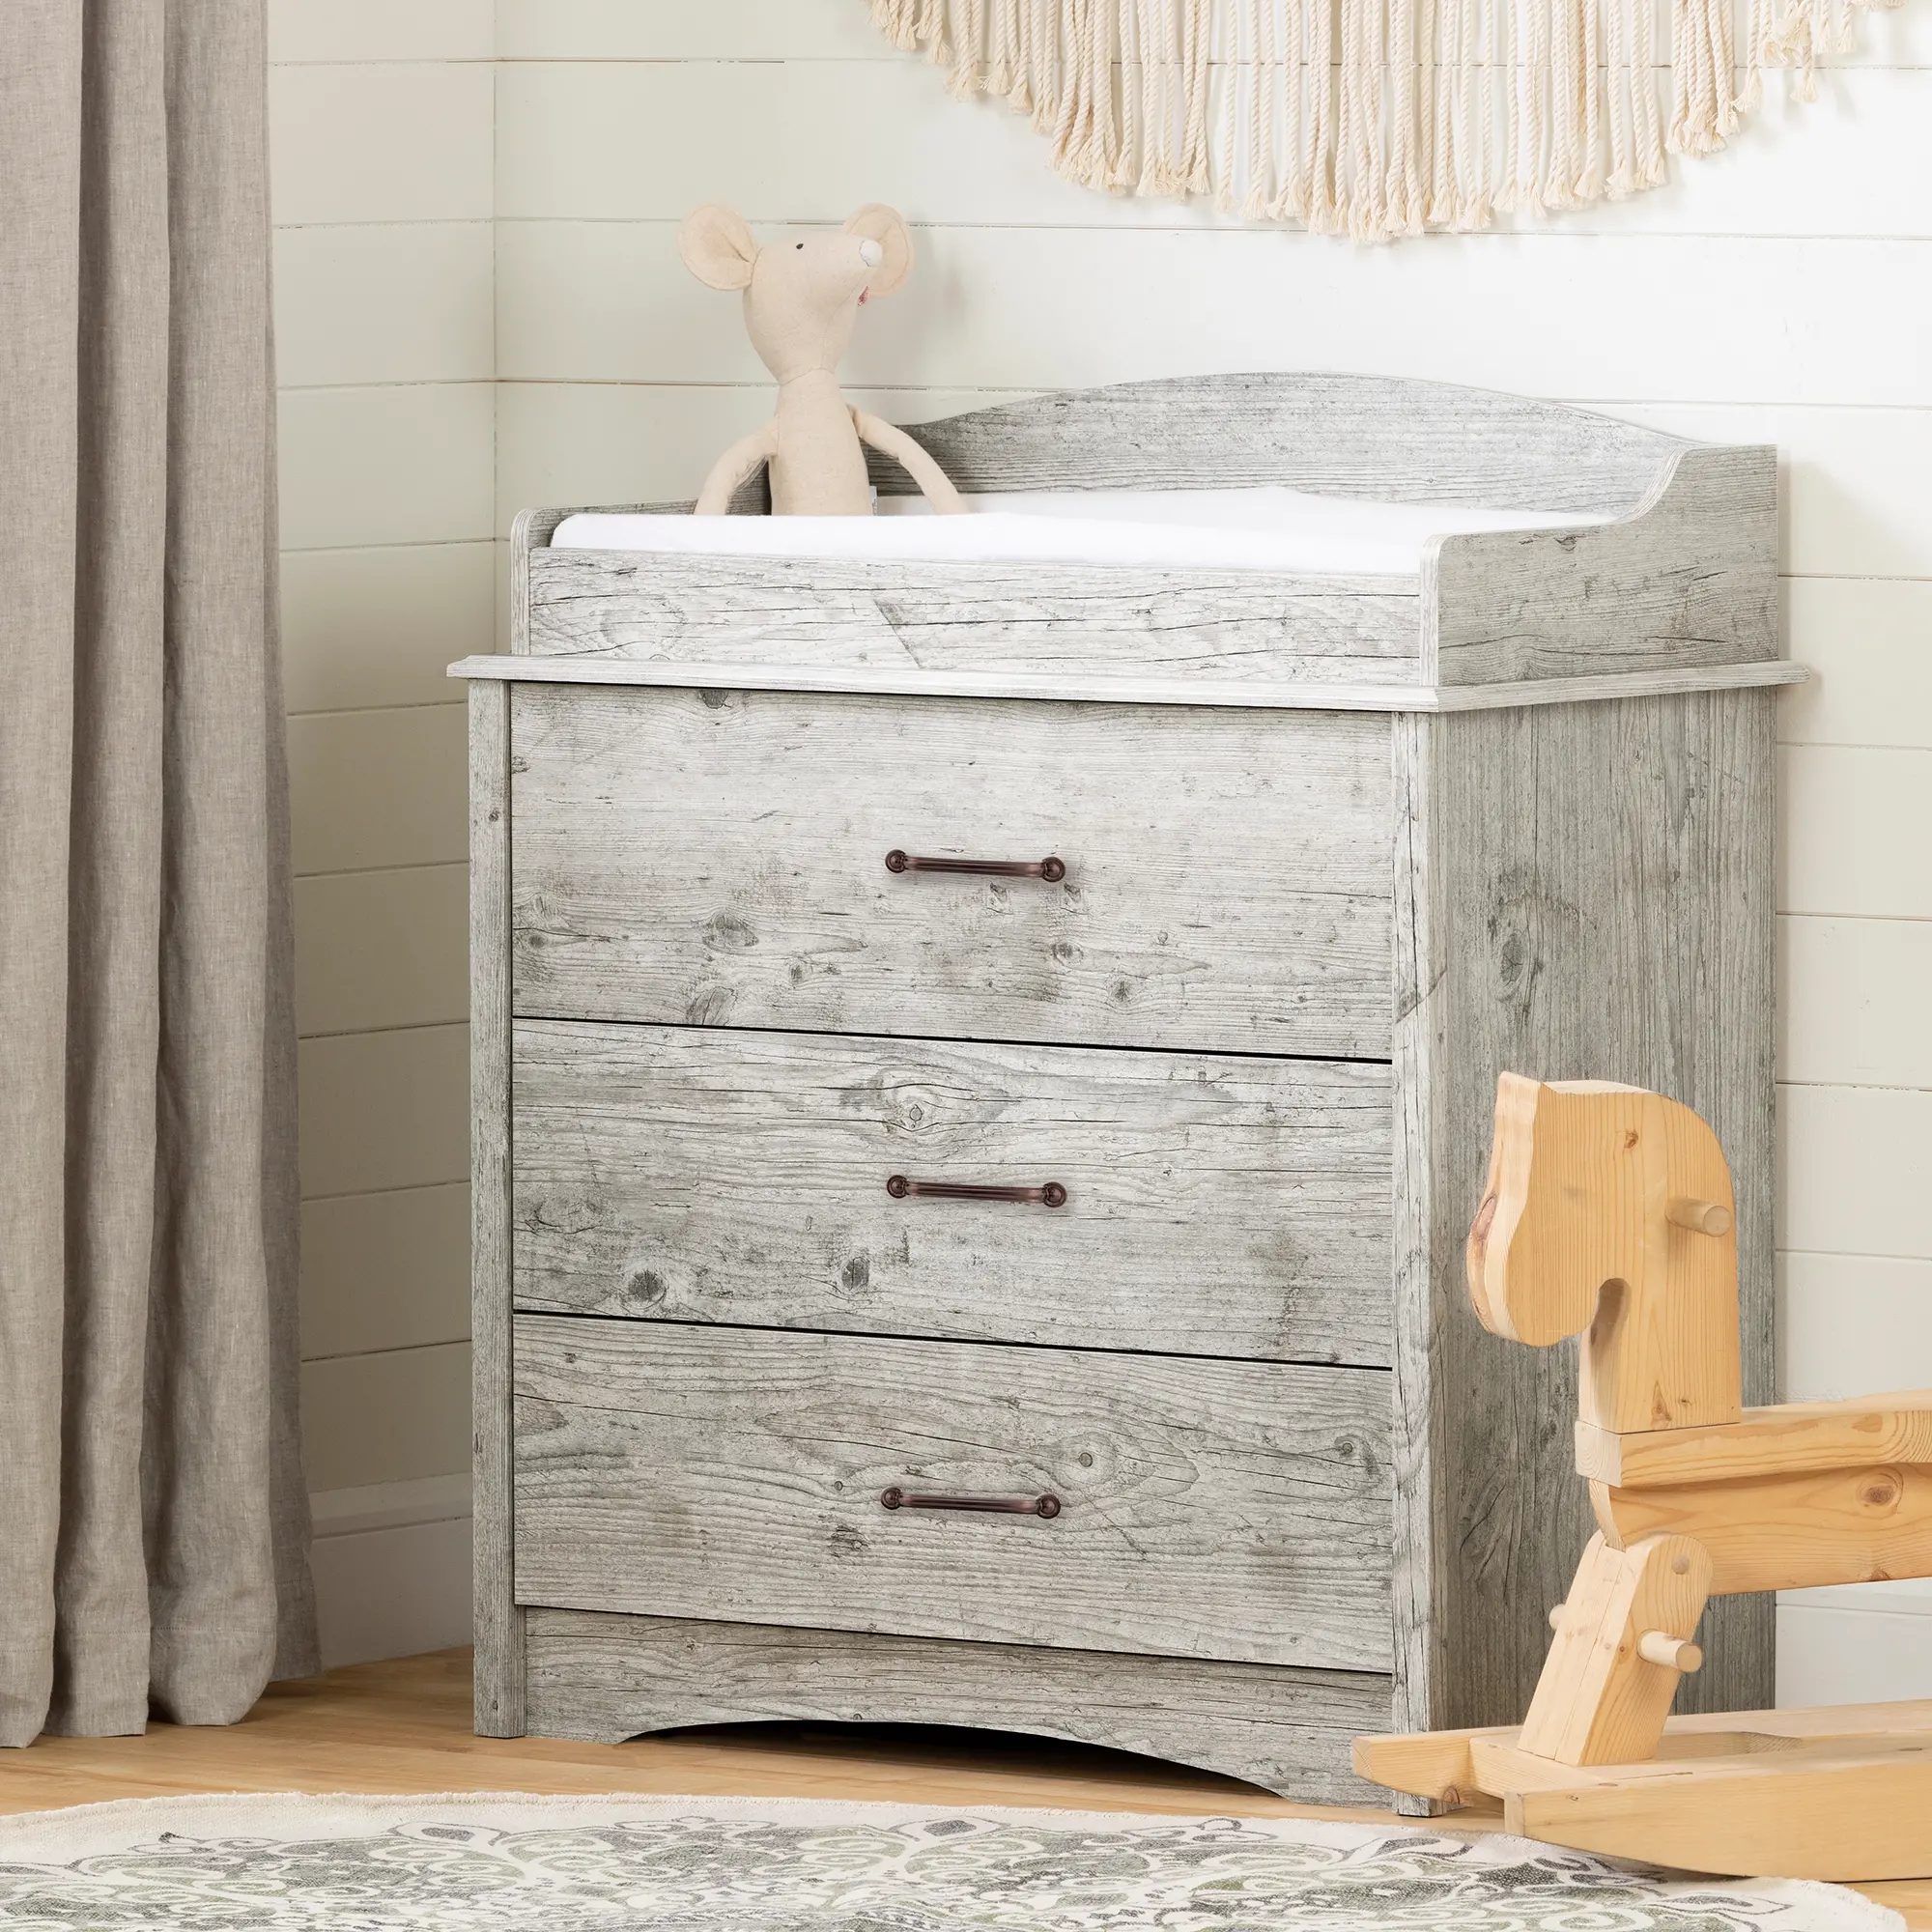 12996 Helson Seaside Pine Changing Table - South Shore sku 12996